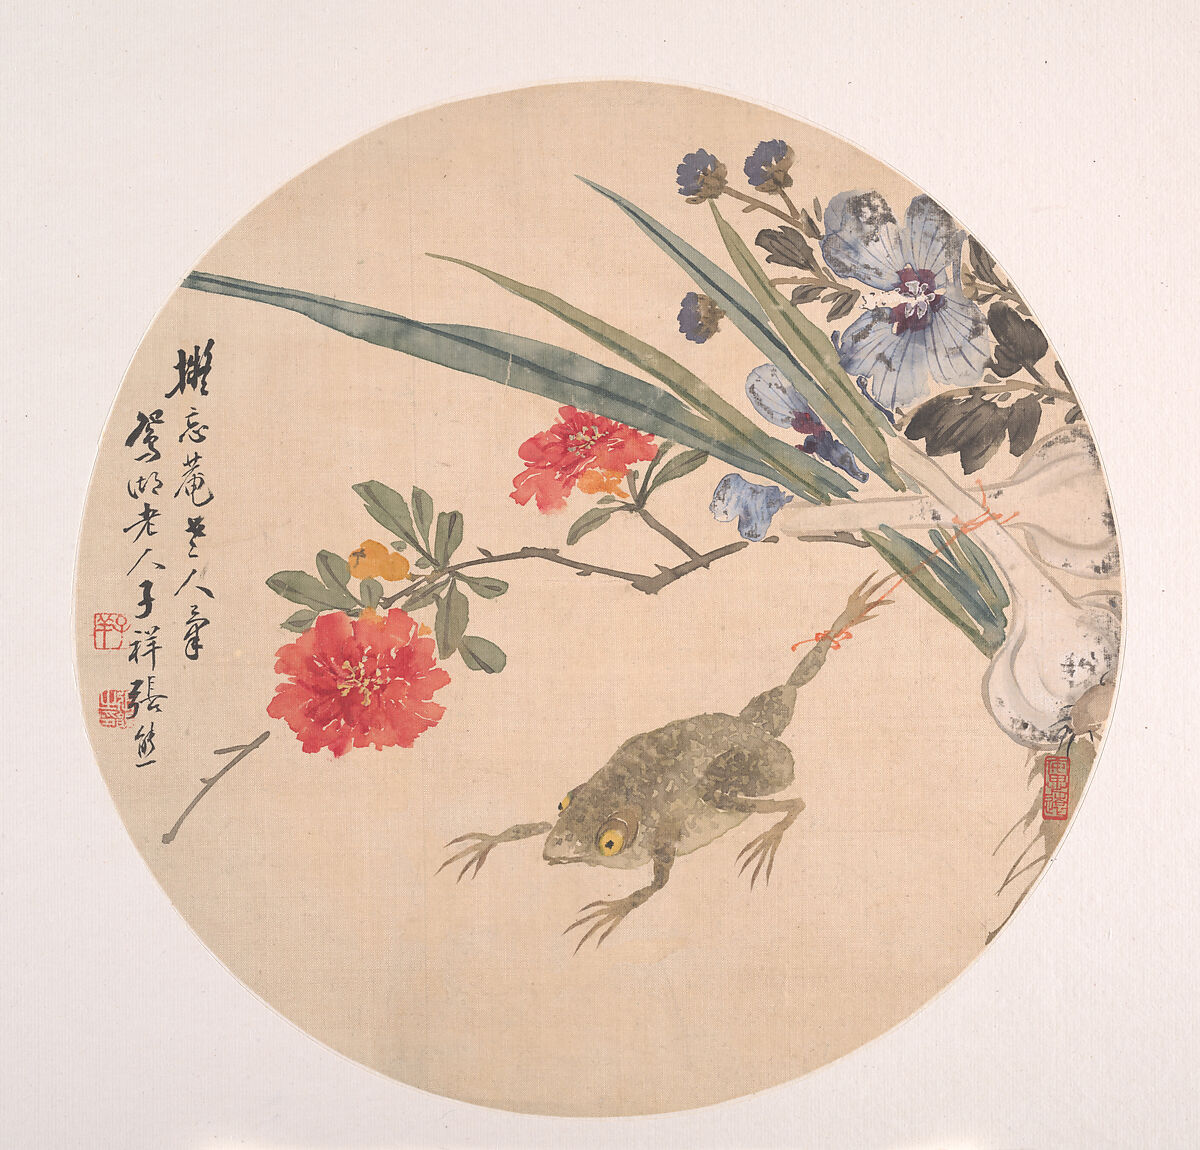 Flower and Toad, Zhang Xiong (Chinese, 1803–1886), Circular fan-shaped album leaf; ink and color on silk, China 